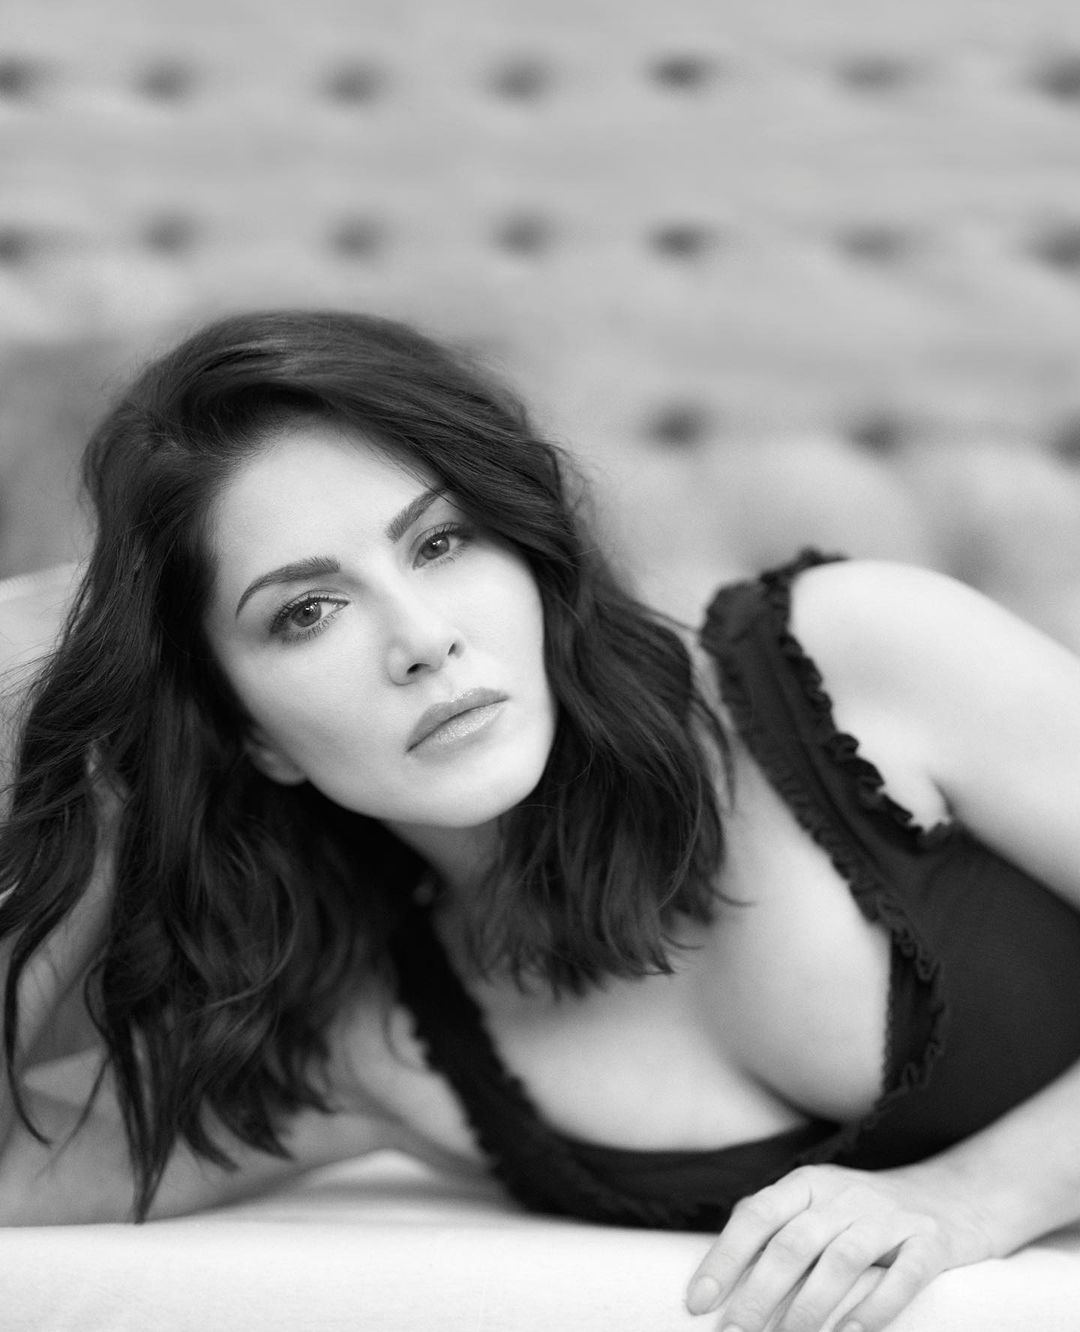 Sunny Leone looks hot as she flaunts her cleavage in a black tank top